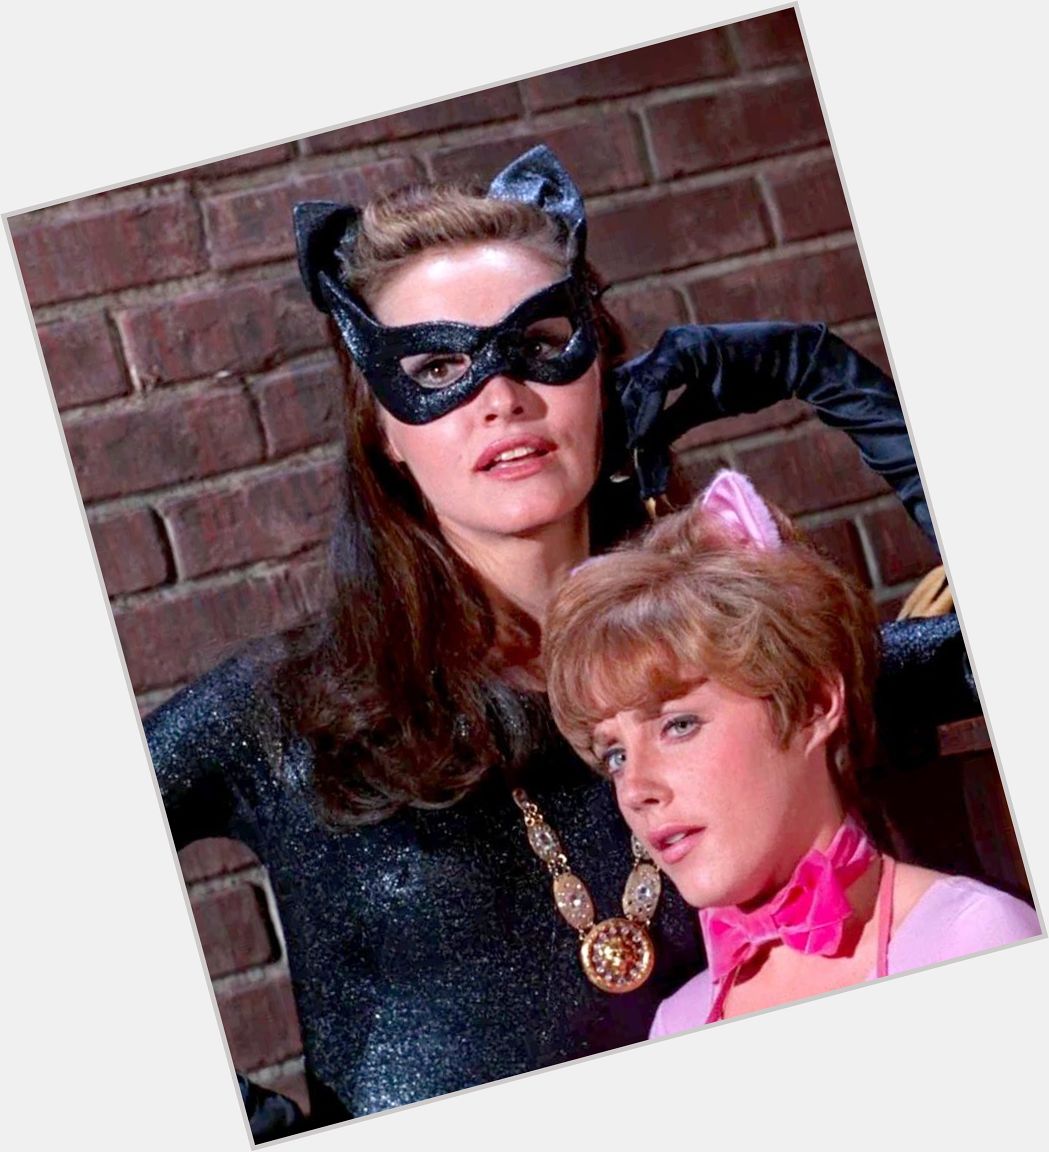 Happy Birthday Lesley Gore(May 2)
w/ Julie Newmar as Kitten and
Catwoman on BATMAN 